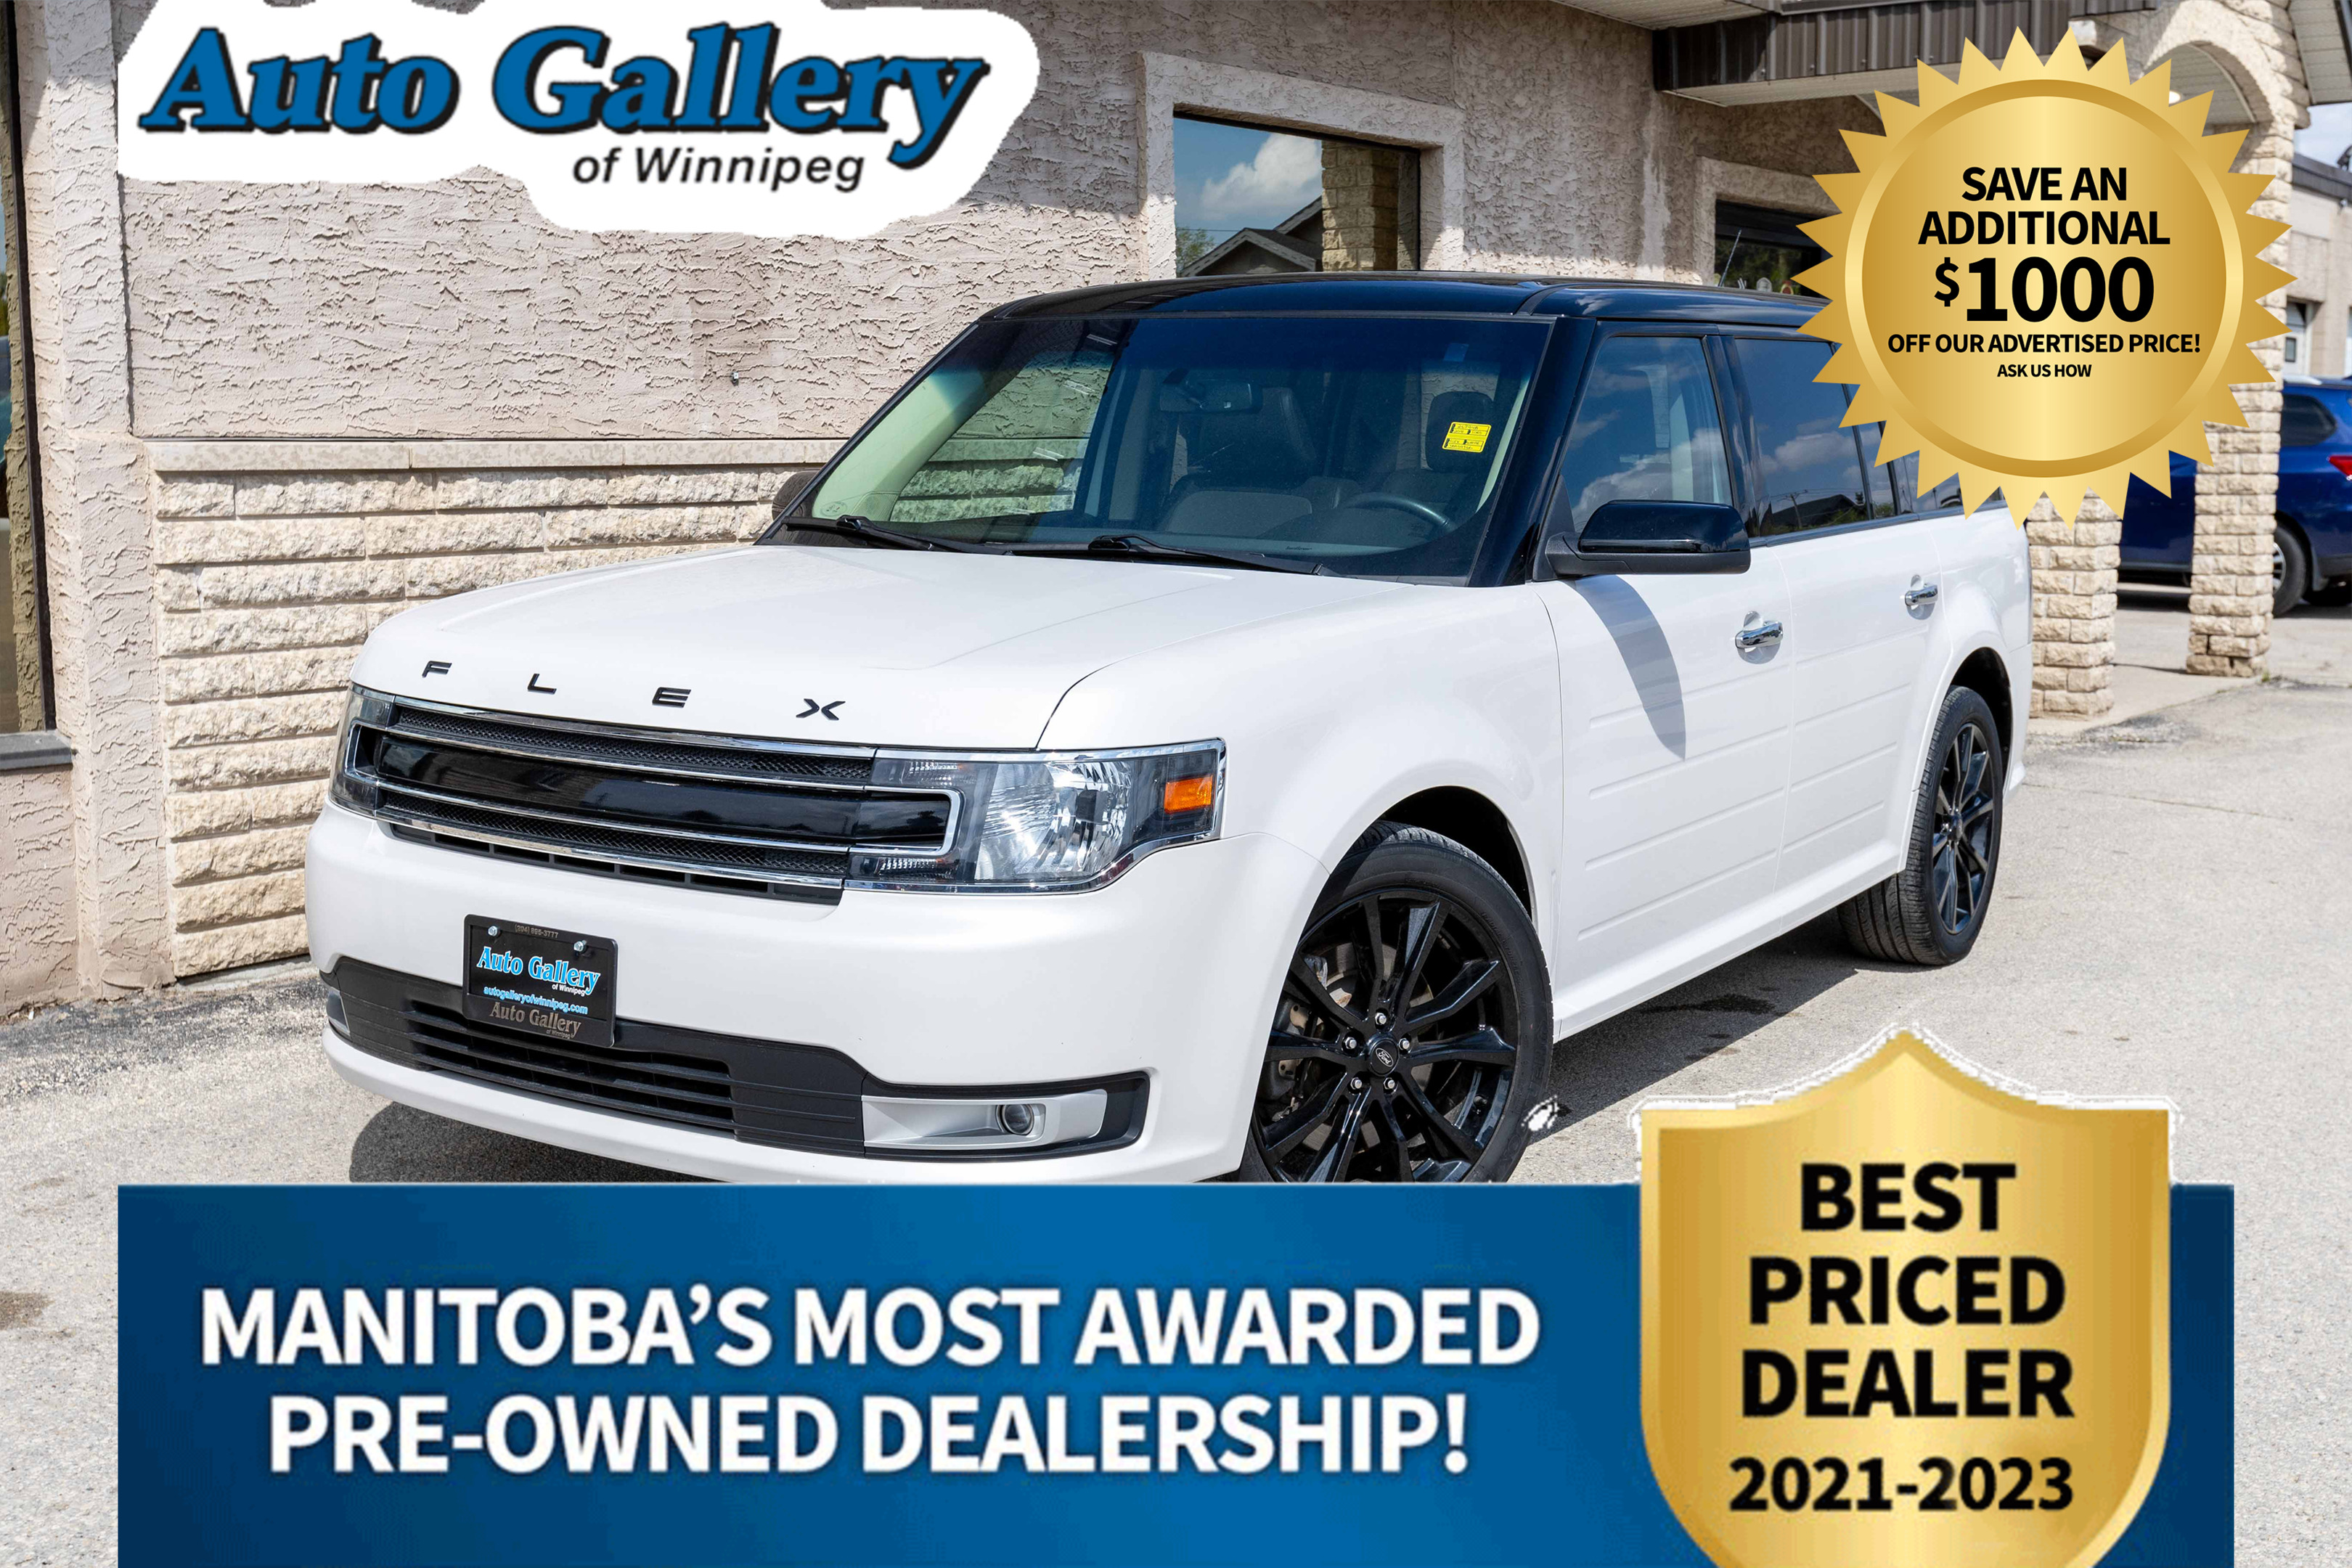 2018 Ford Flex SEL AWD, HTD SEATS, LEATHER, SUNROOF, NAVIGATION